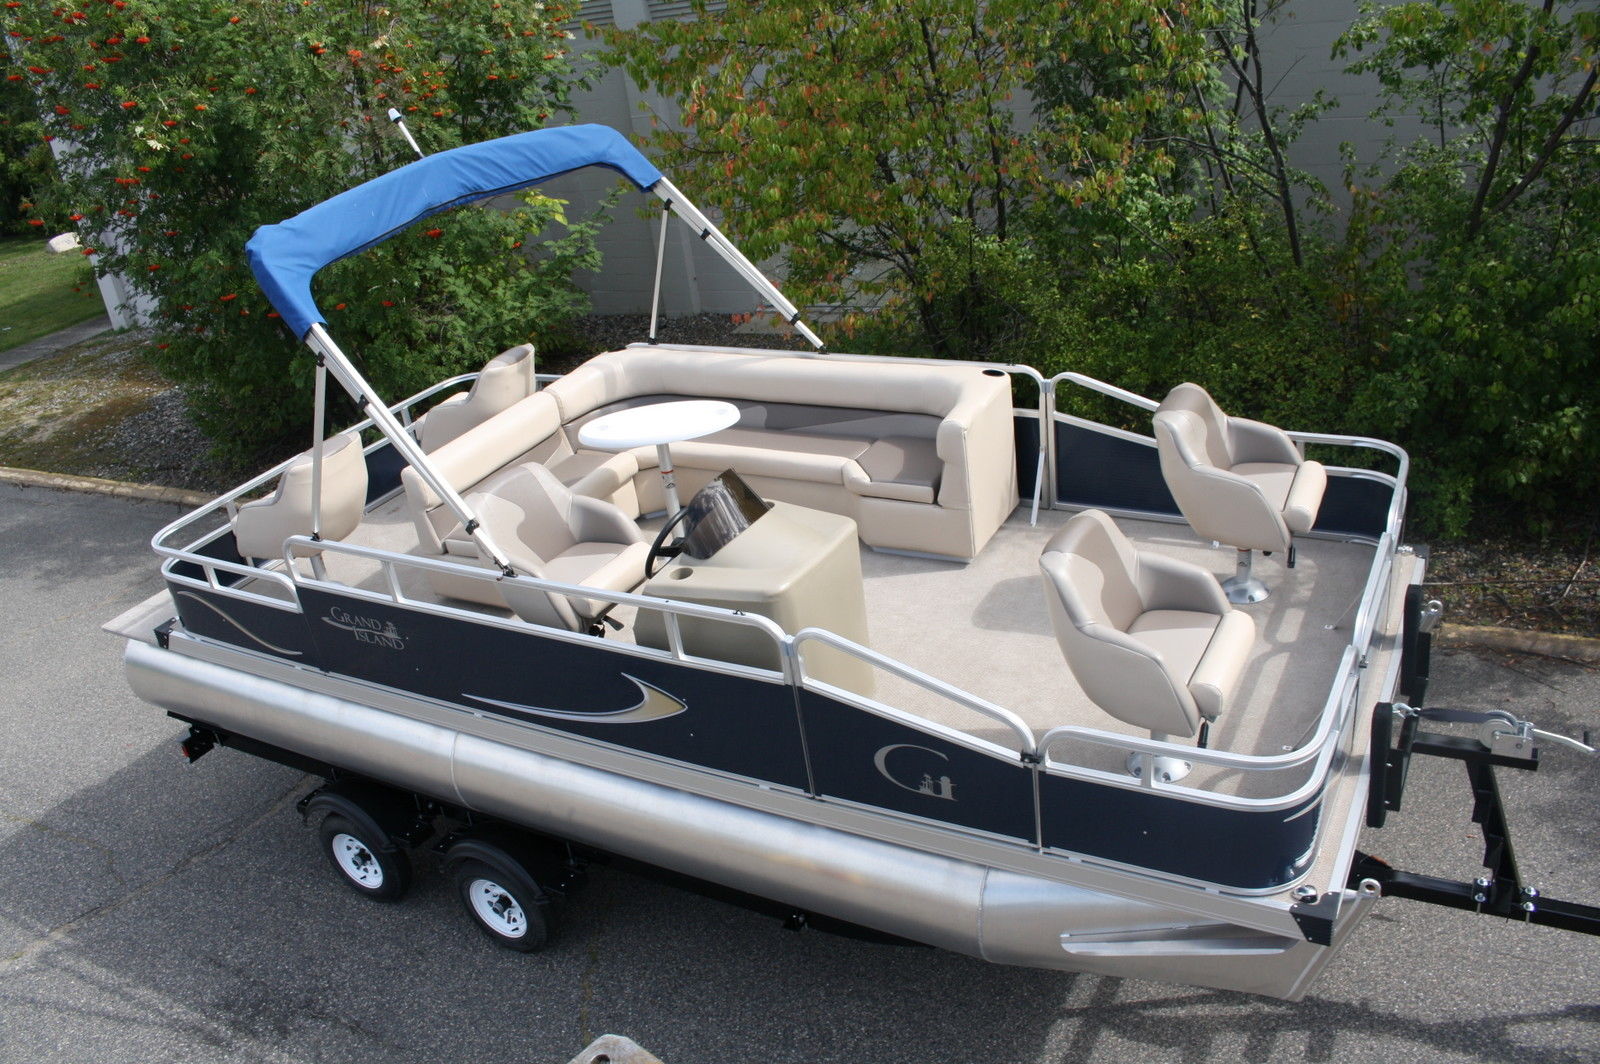 Grand Island 20 Party Fish 2017 for sale for $14,999 